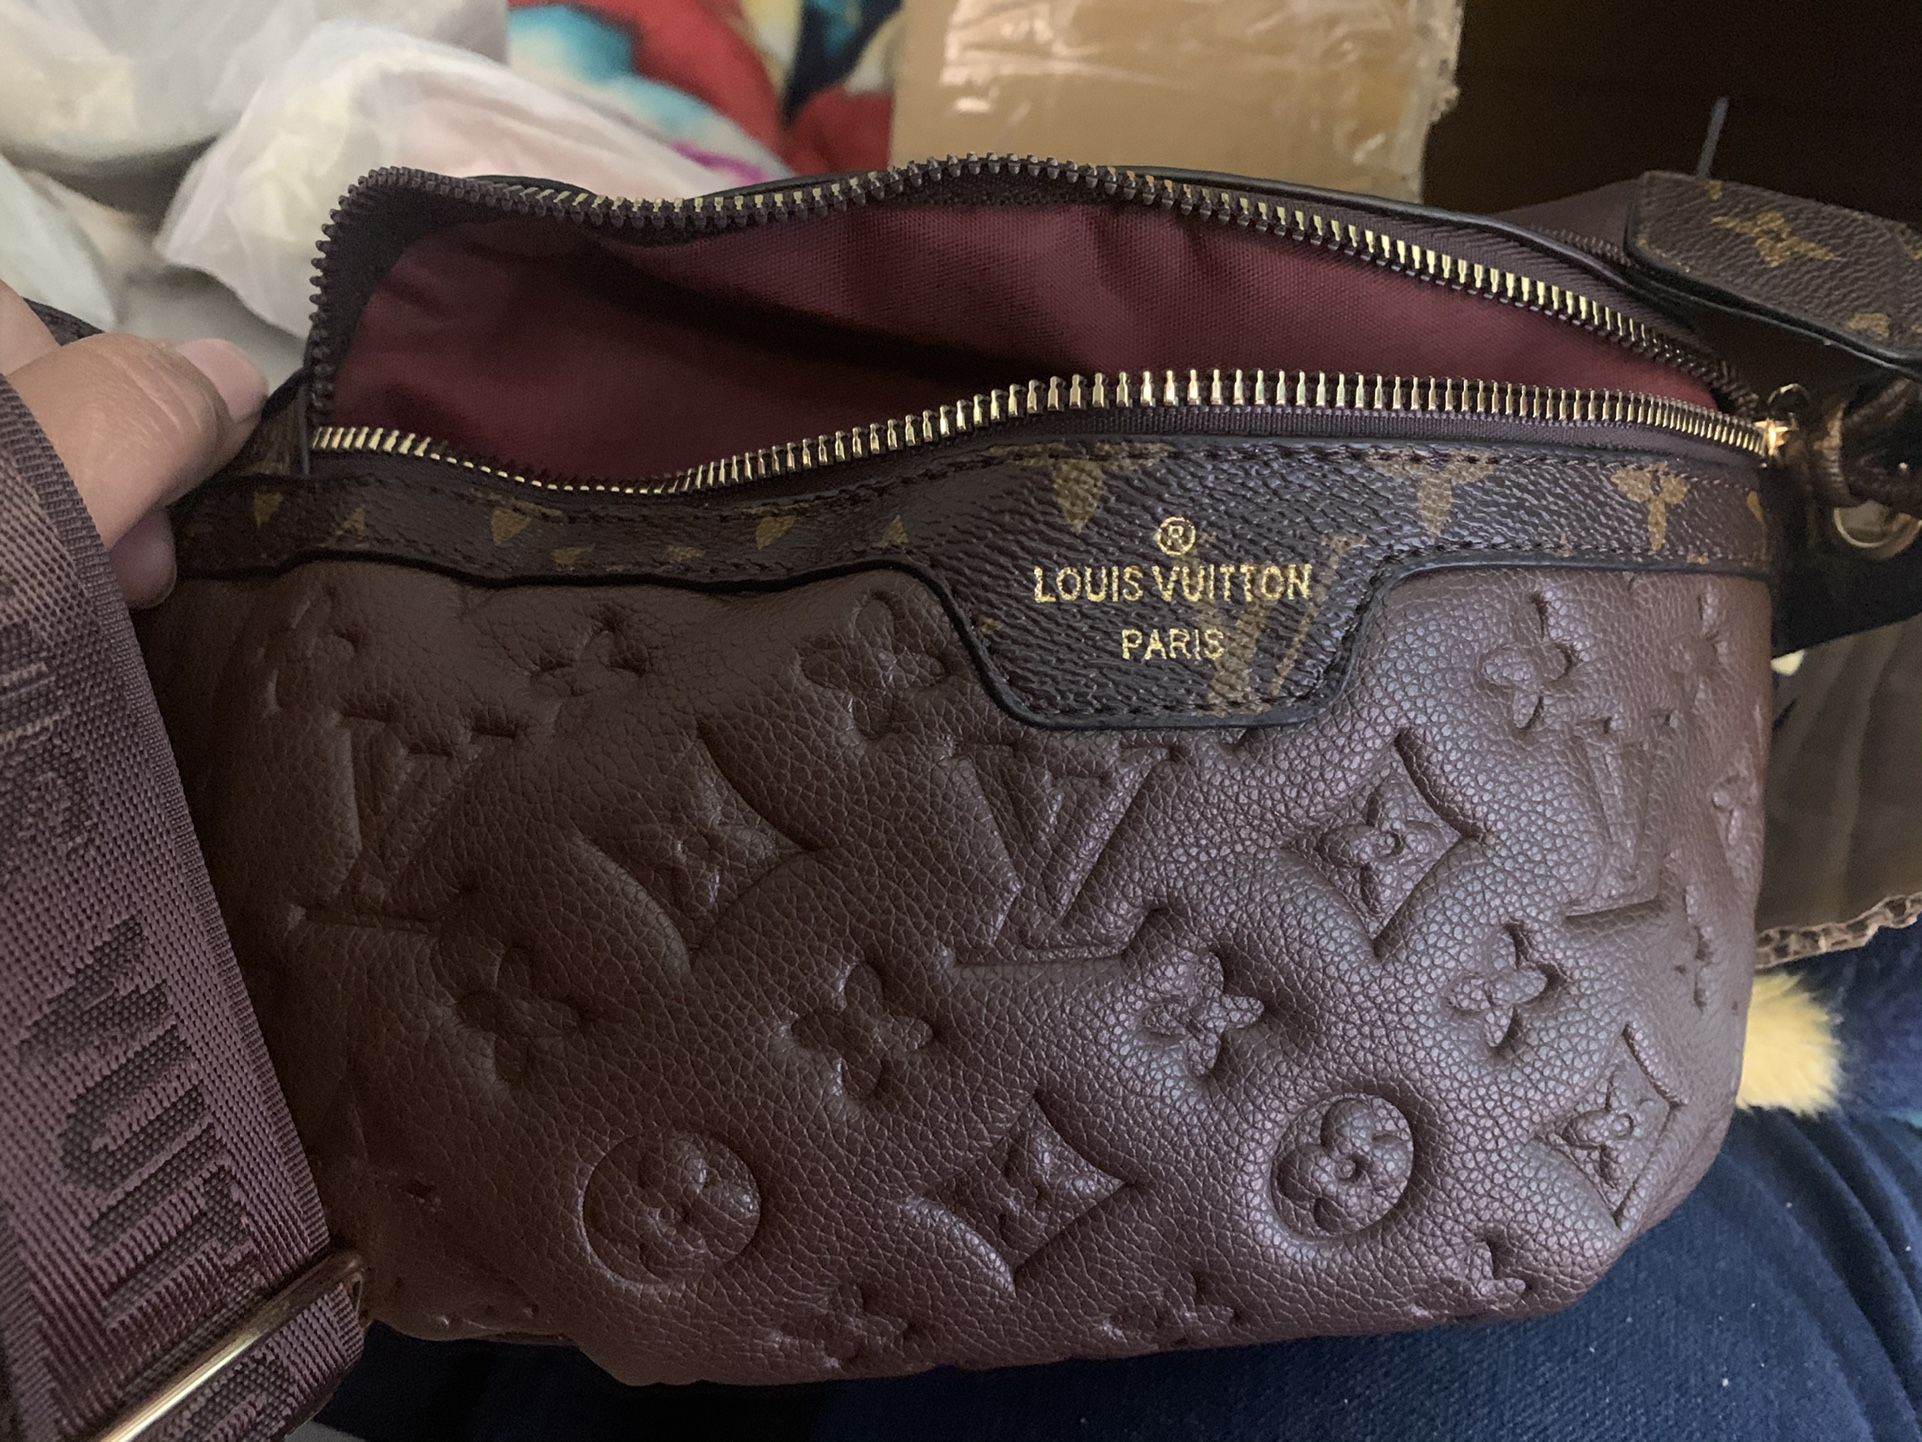 LV Bag for Sale in Humble, TX - OfferUp